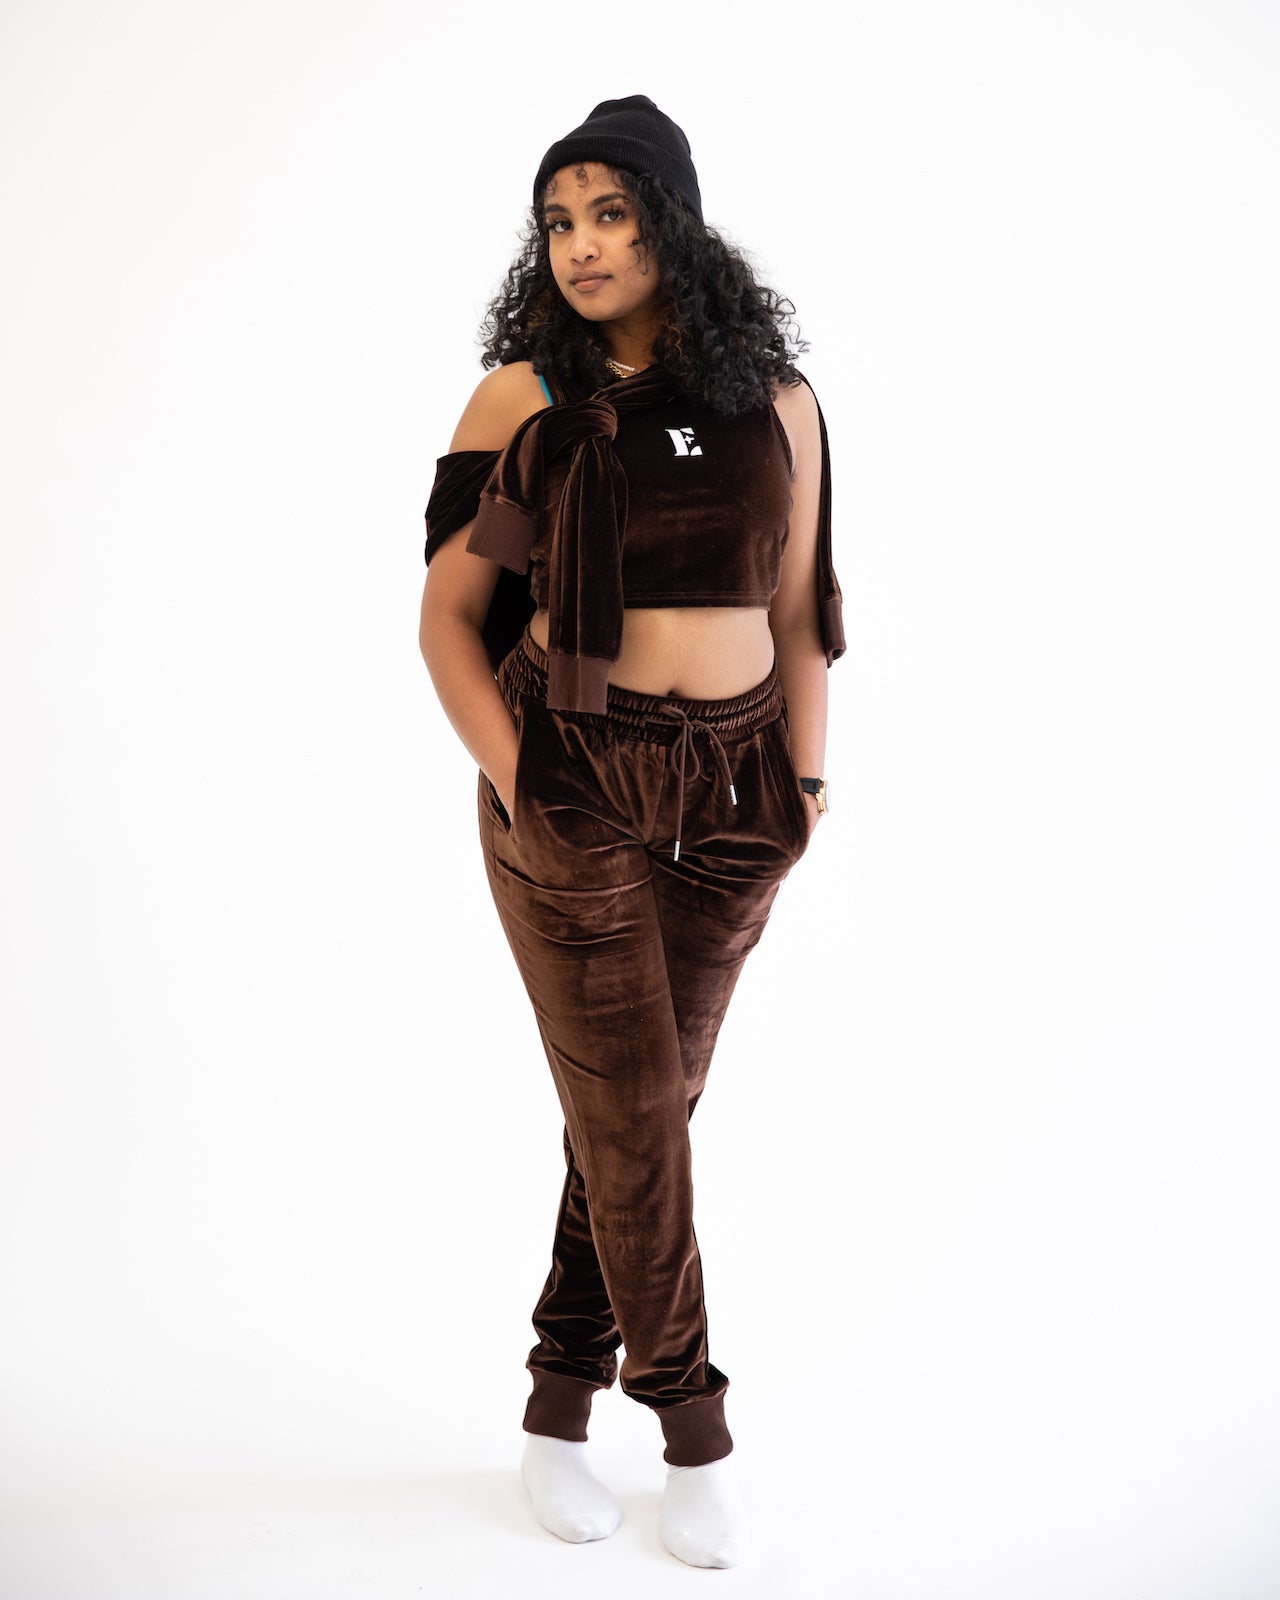 Chocolate Brown Joggers for Women